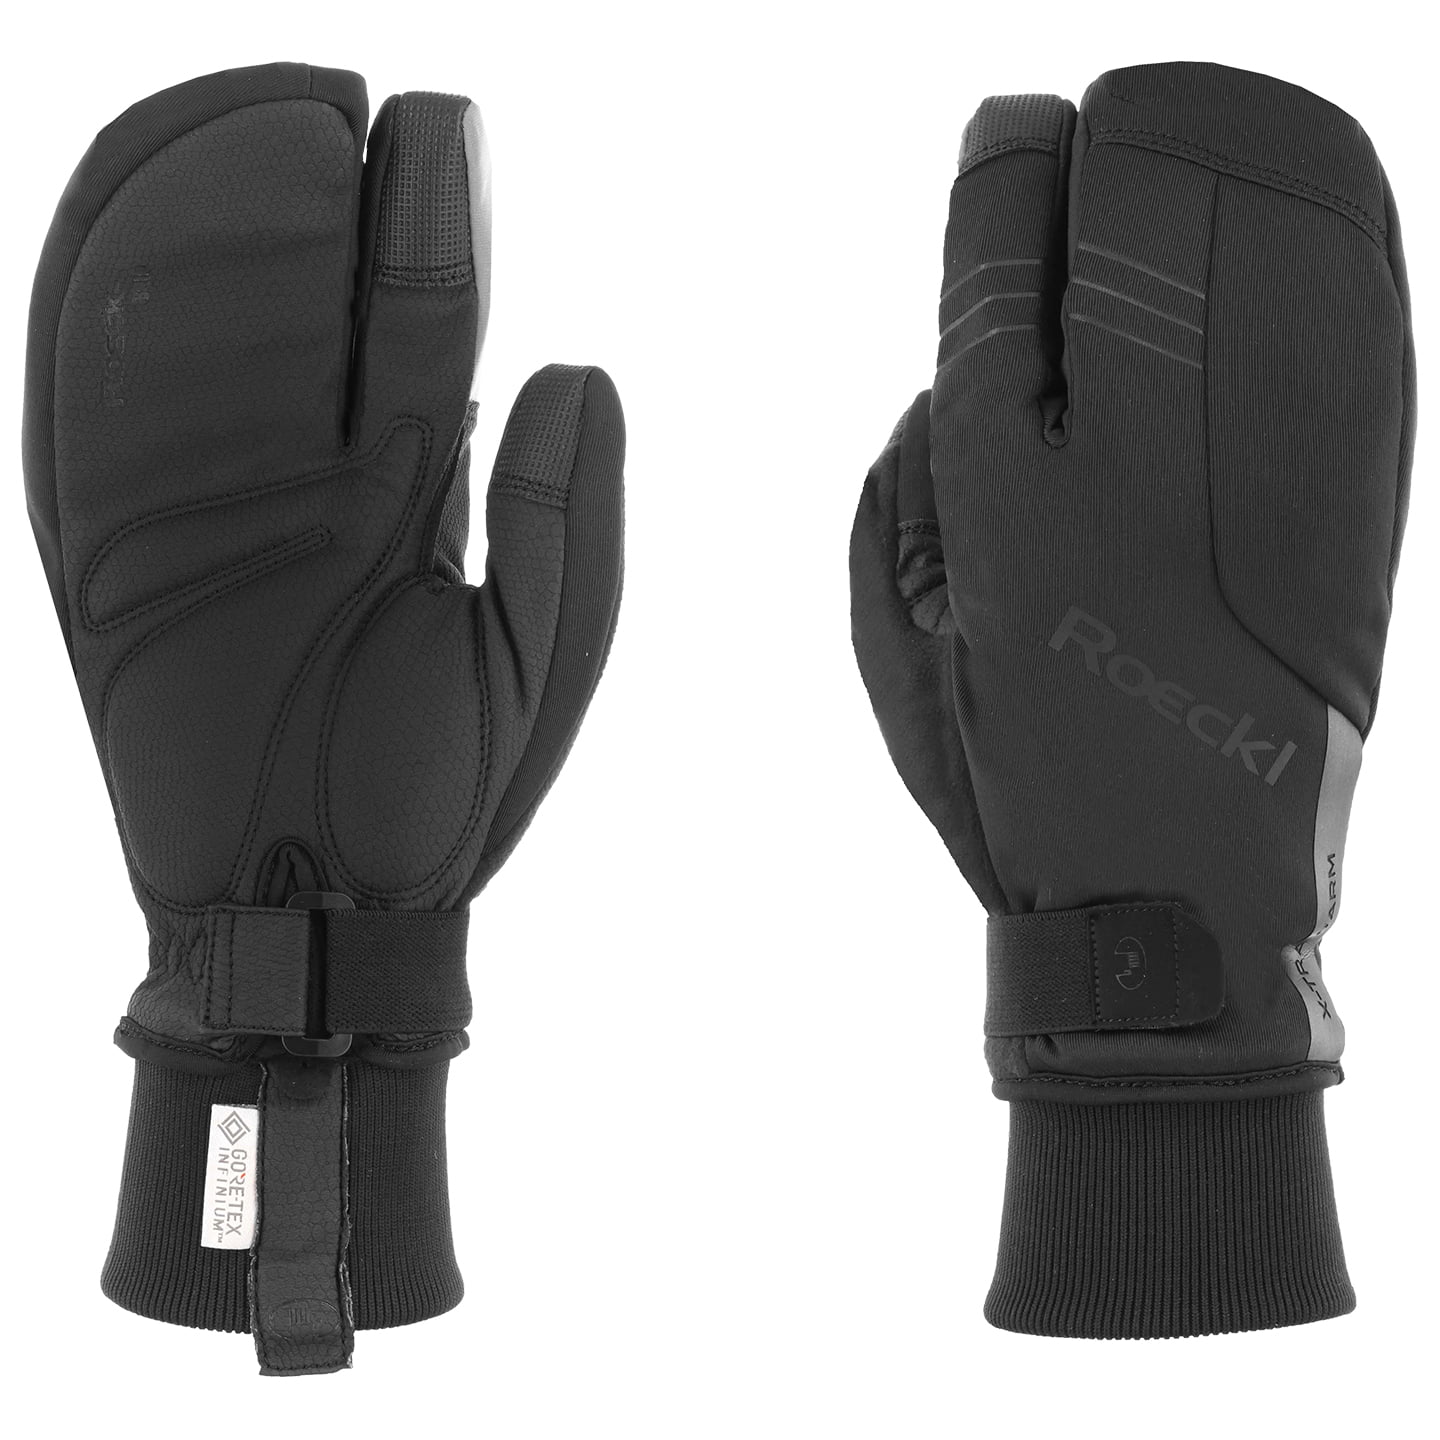 ROECKL Villach 2 Trigger Winter Gloves Winter Cycling Gloves, for men, size 8,5, MTB gloves, Cycling apparel